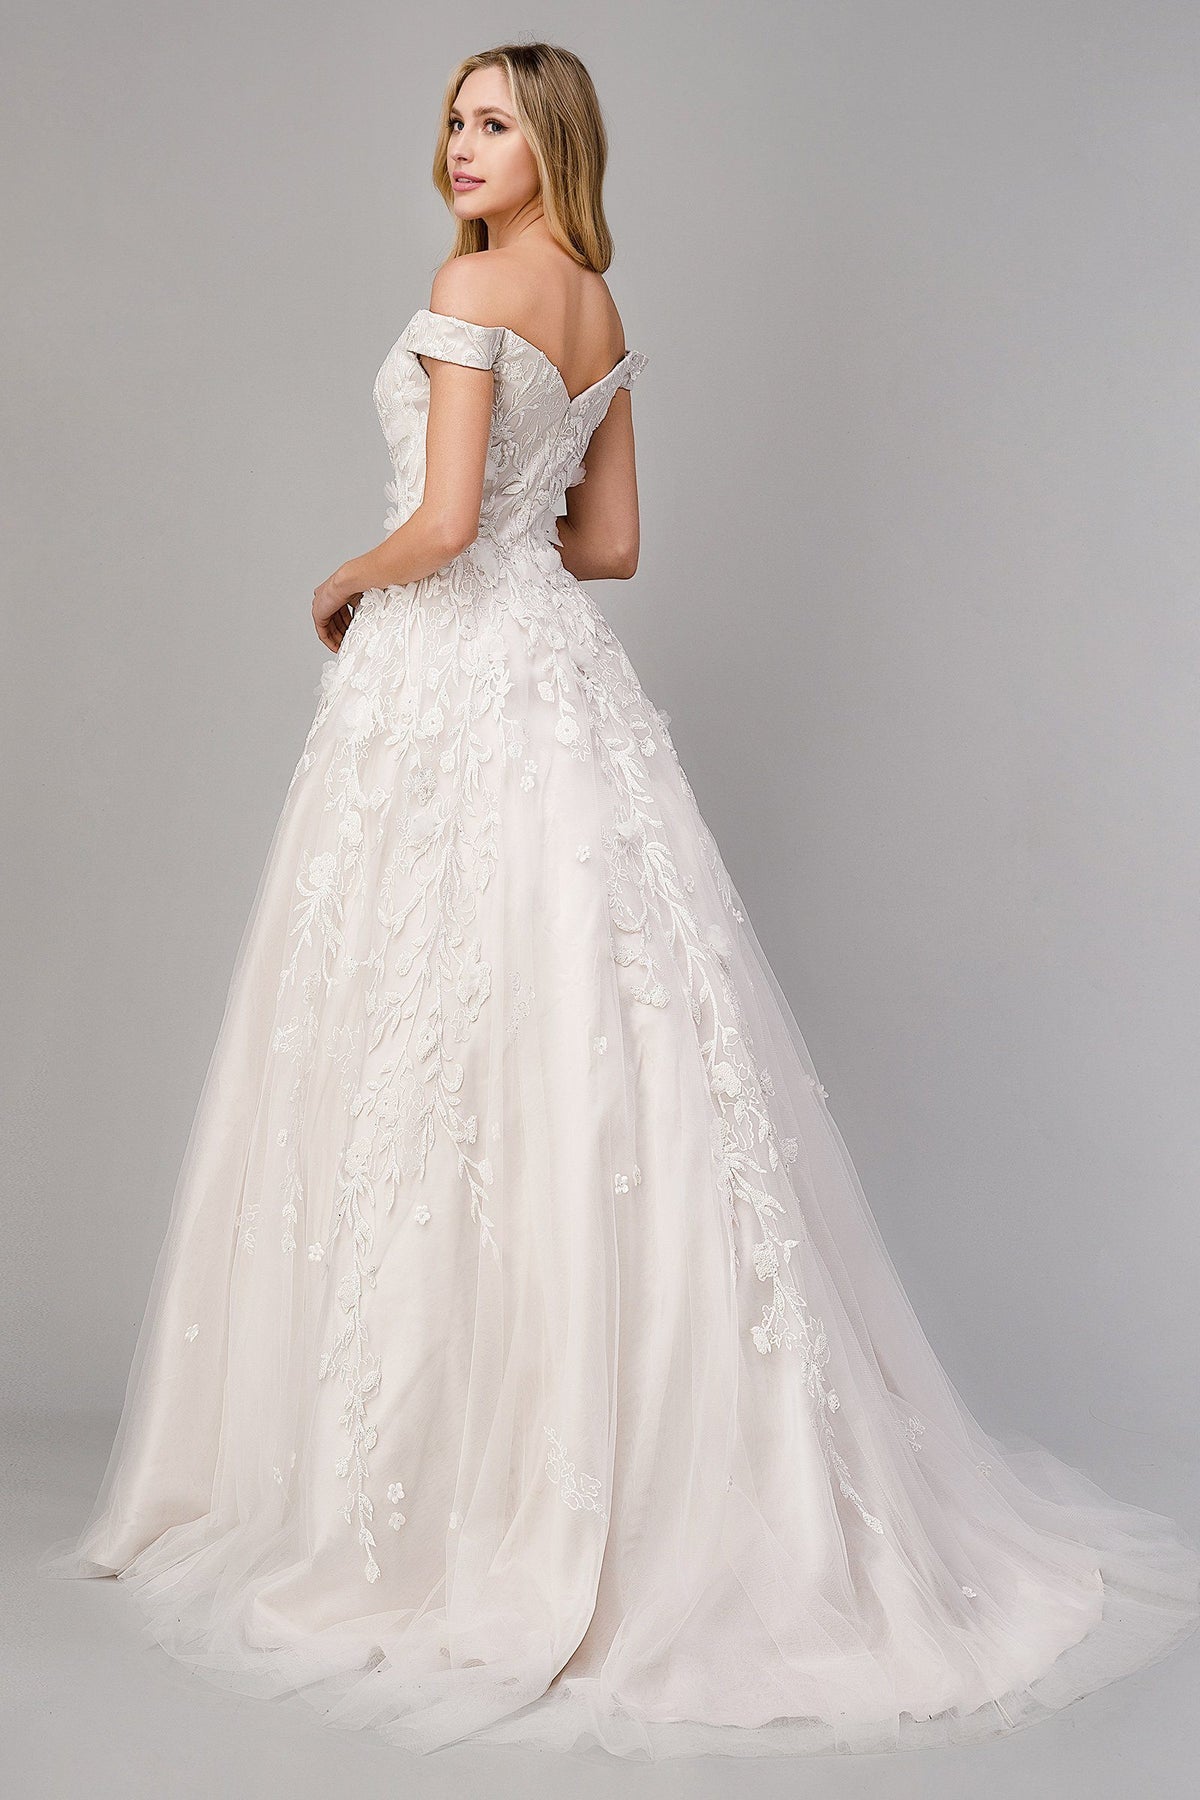 ball gown wedding dress with corset back